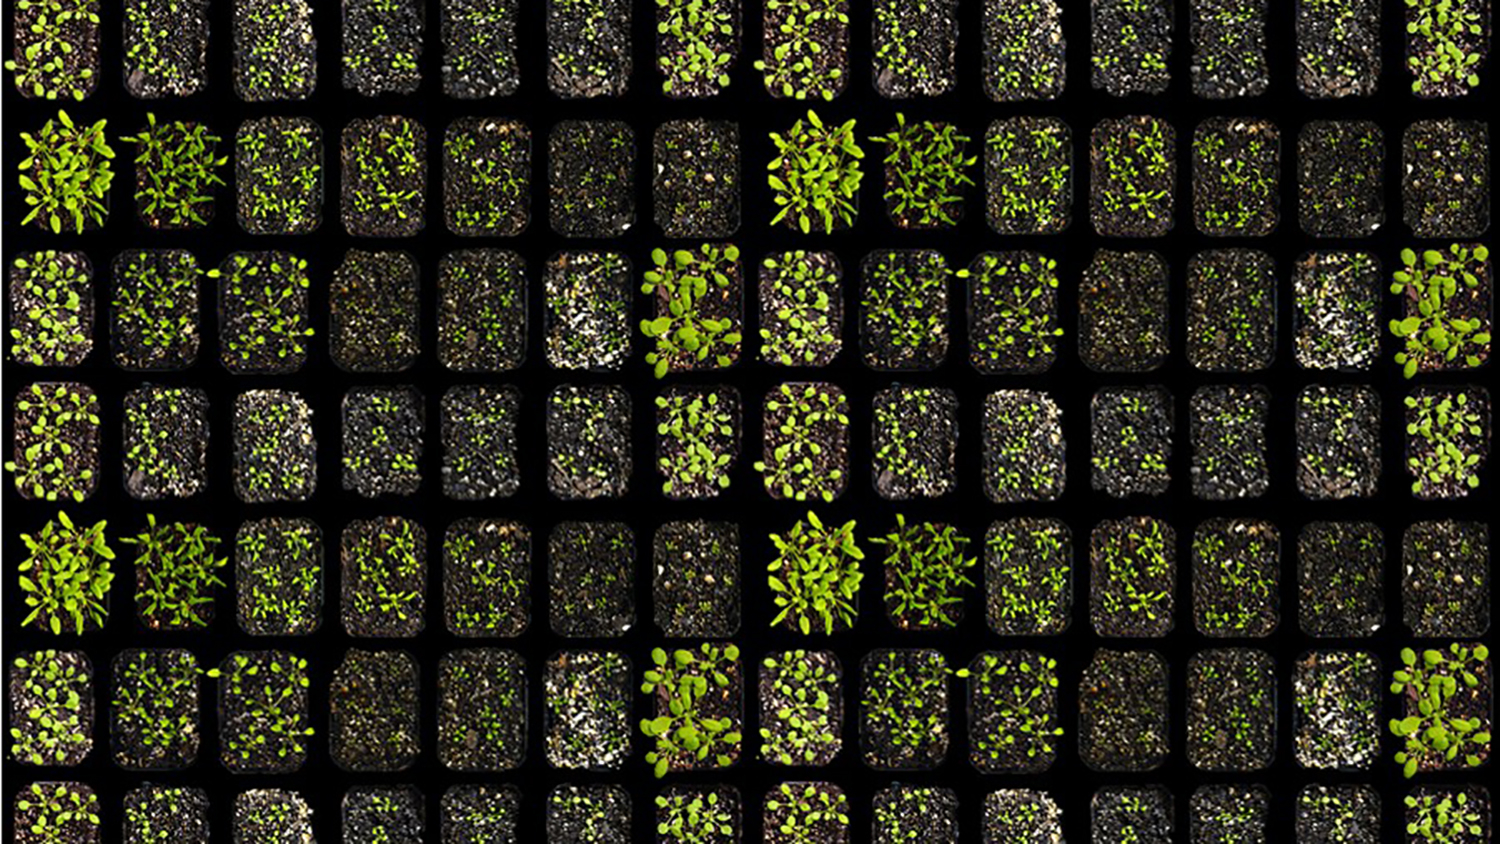 Seedlings in trays, viewed from above